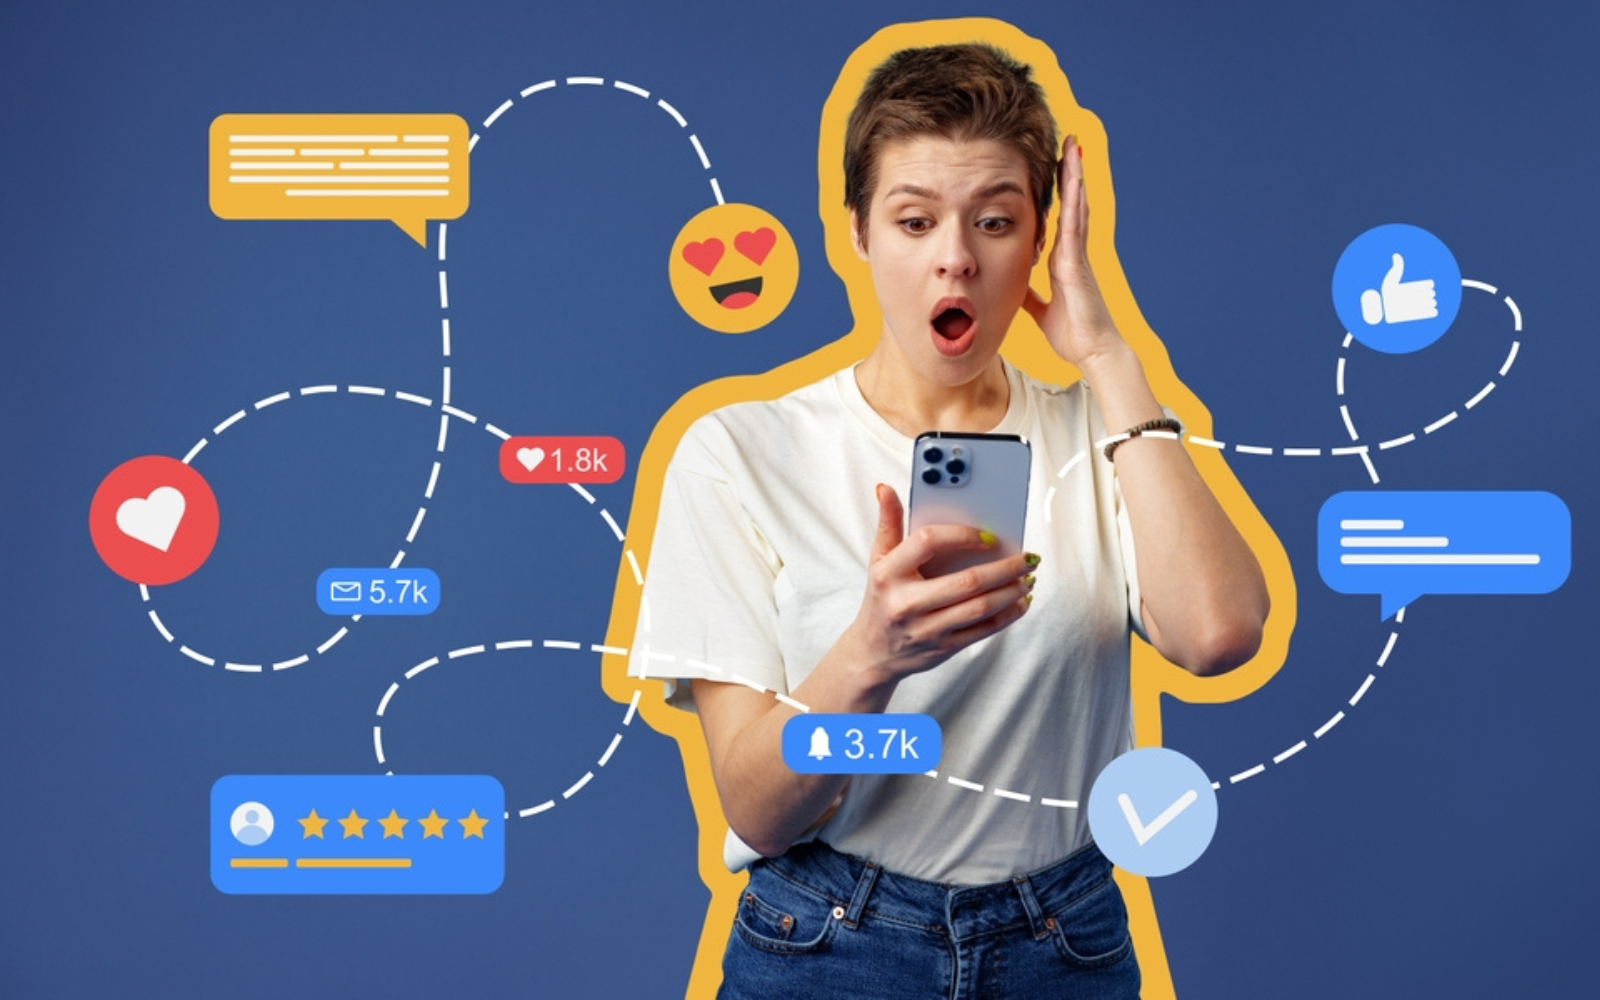 A surprised young woman using a smartphone surrounded by social media icons and emojis, including likes, comments, and ratings, on a blue background, illustrating aspects of brand community.